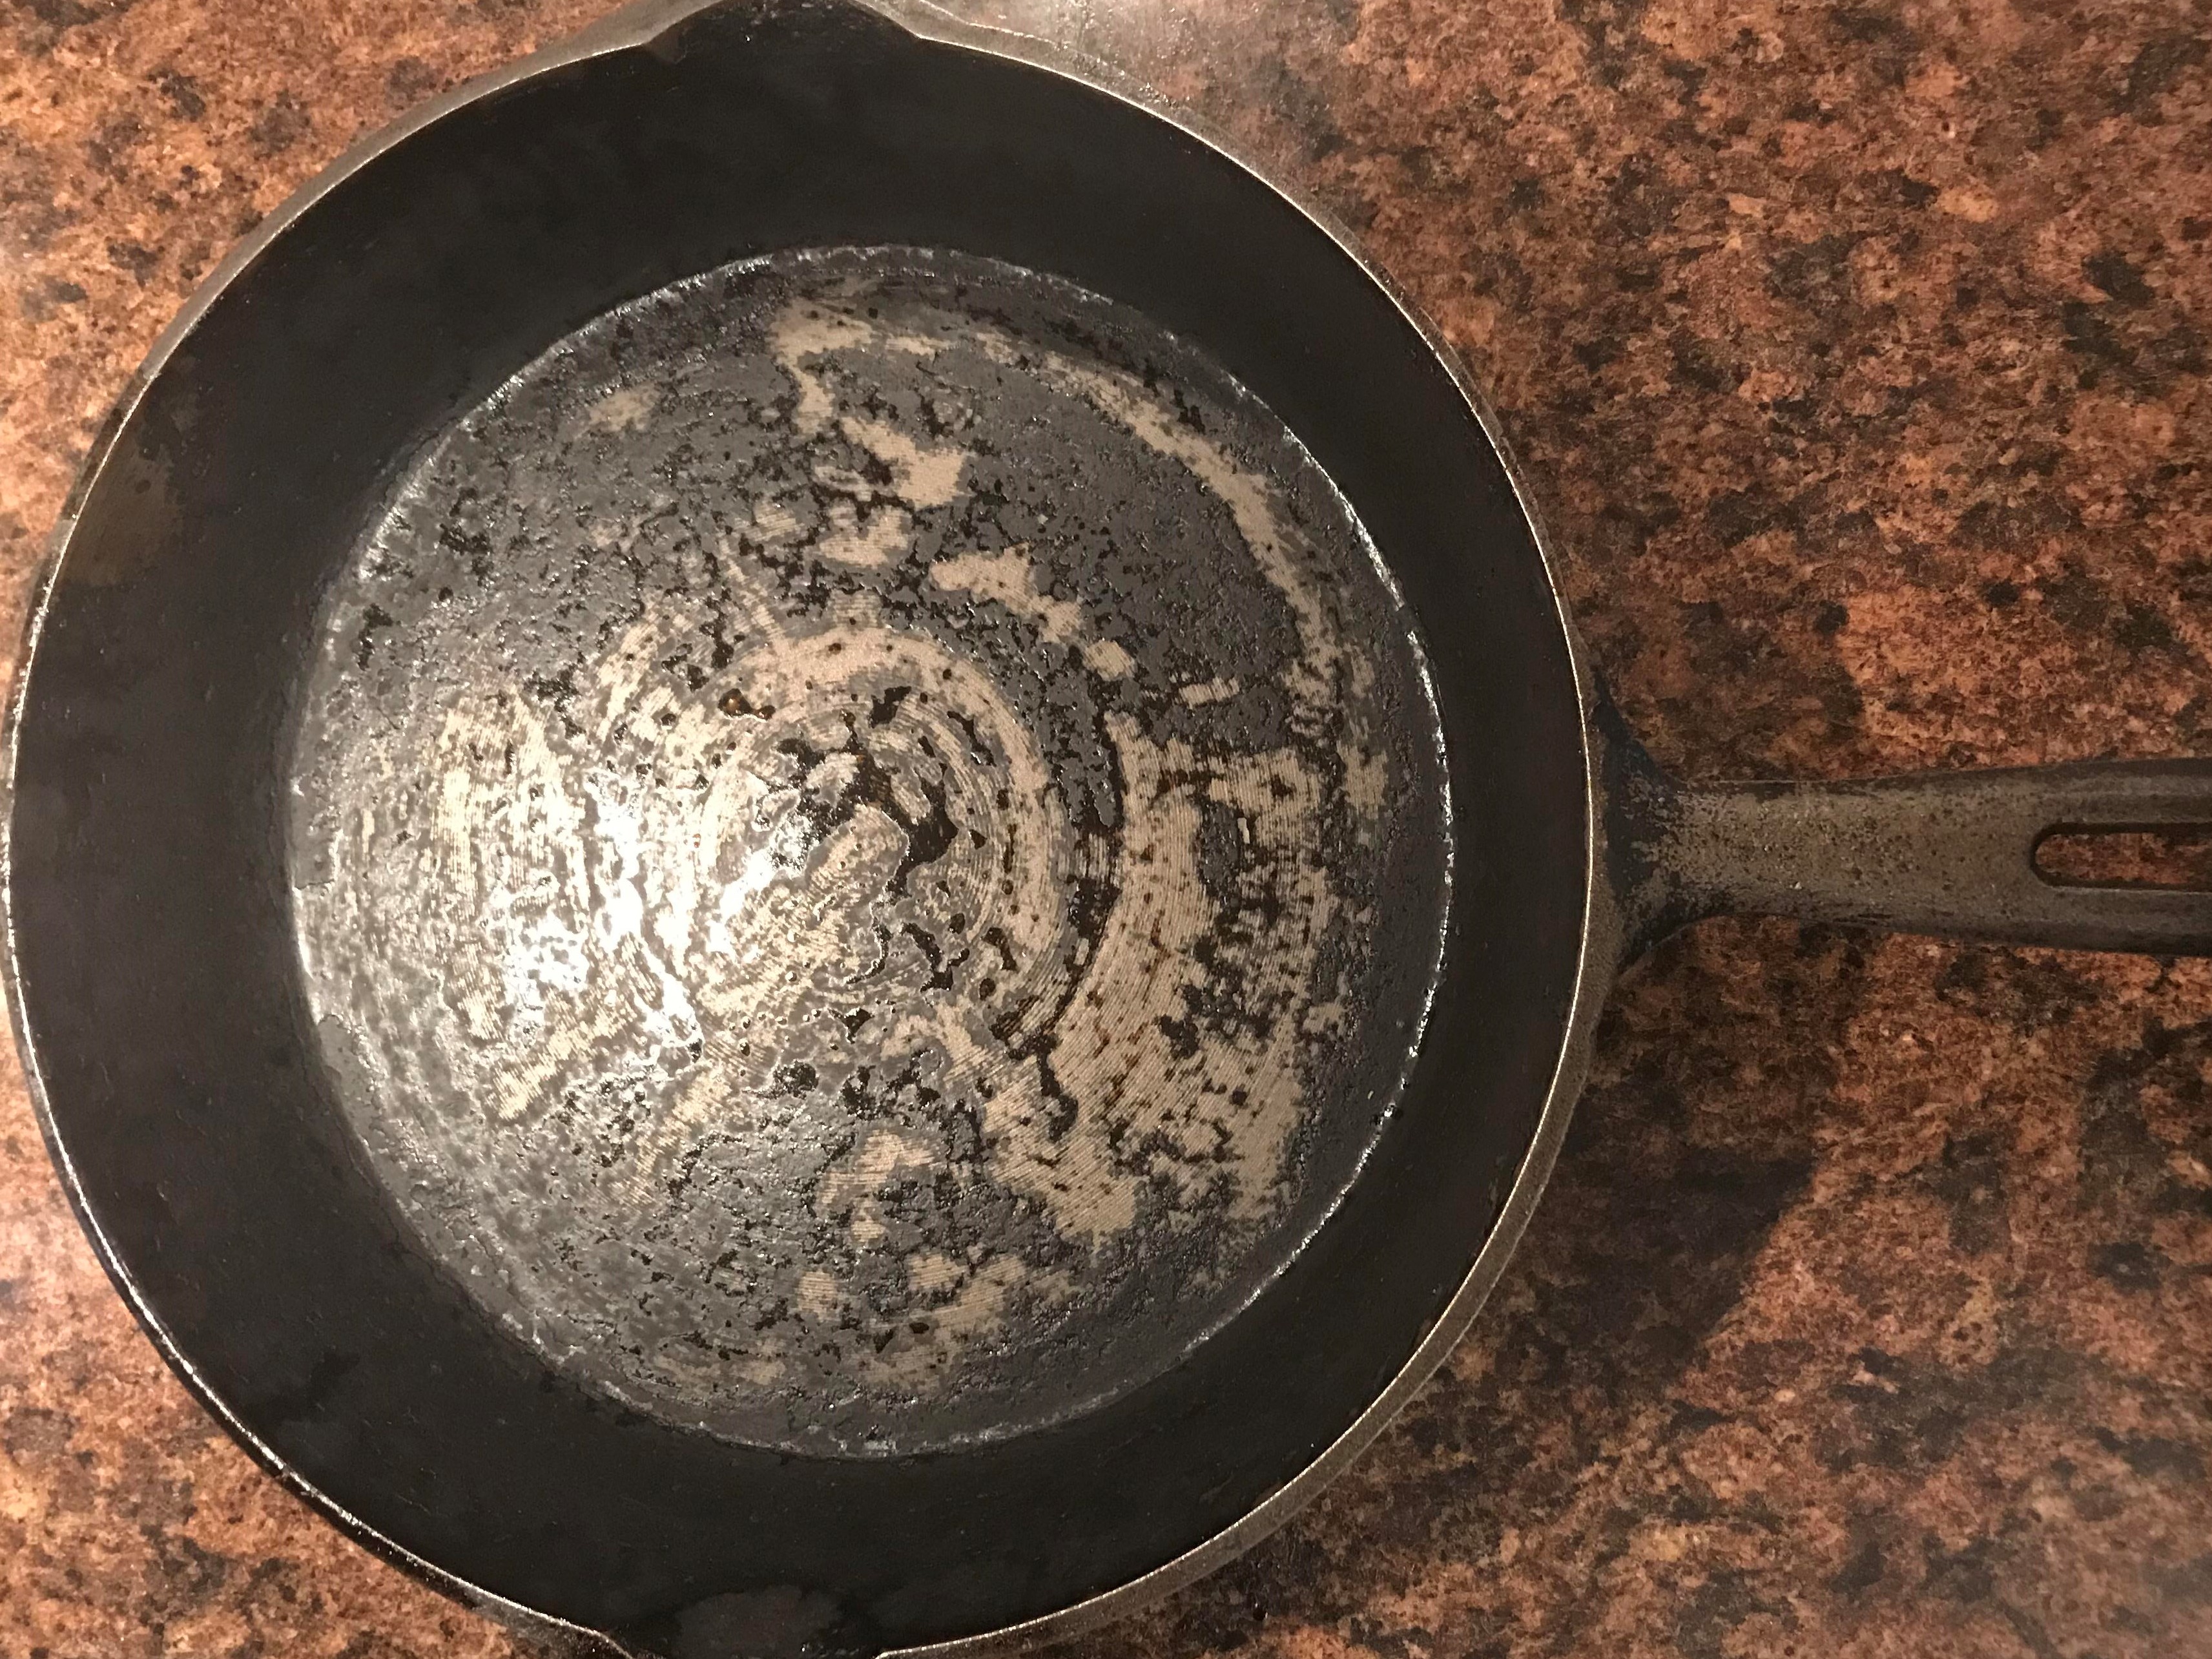 cast iron skillet #3 with uneven, splotchy seasoning